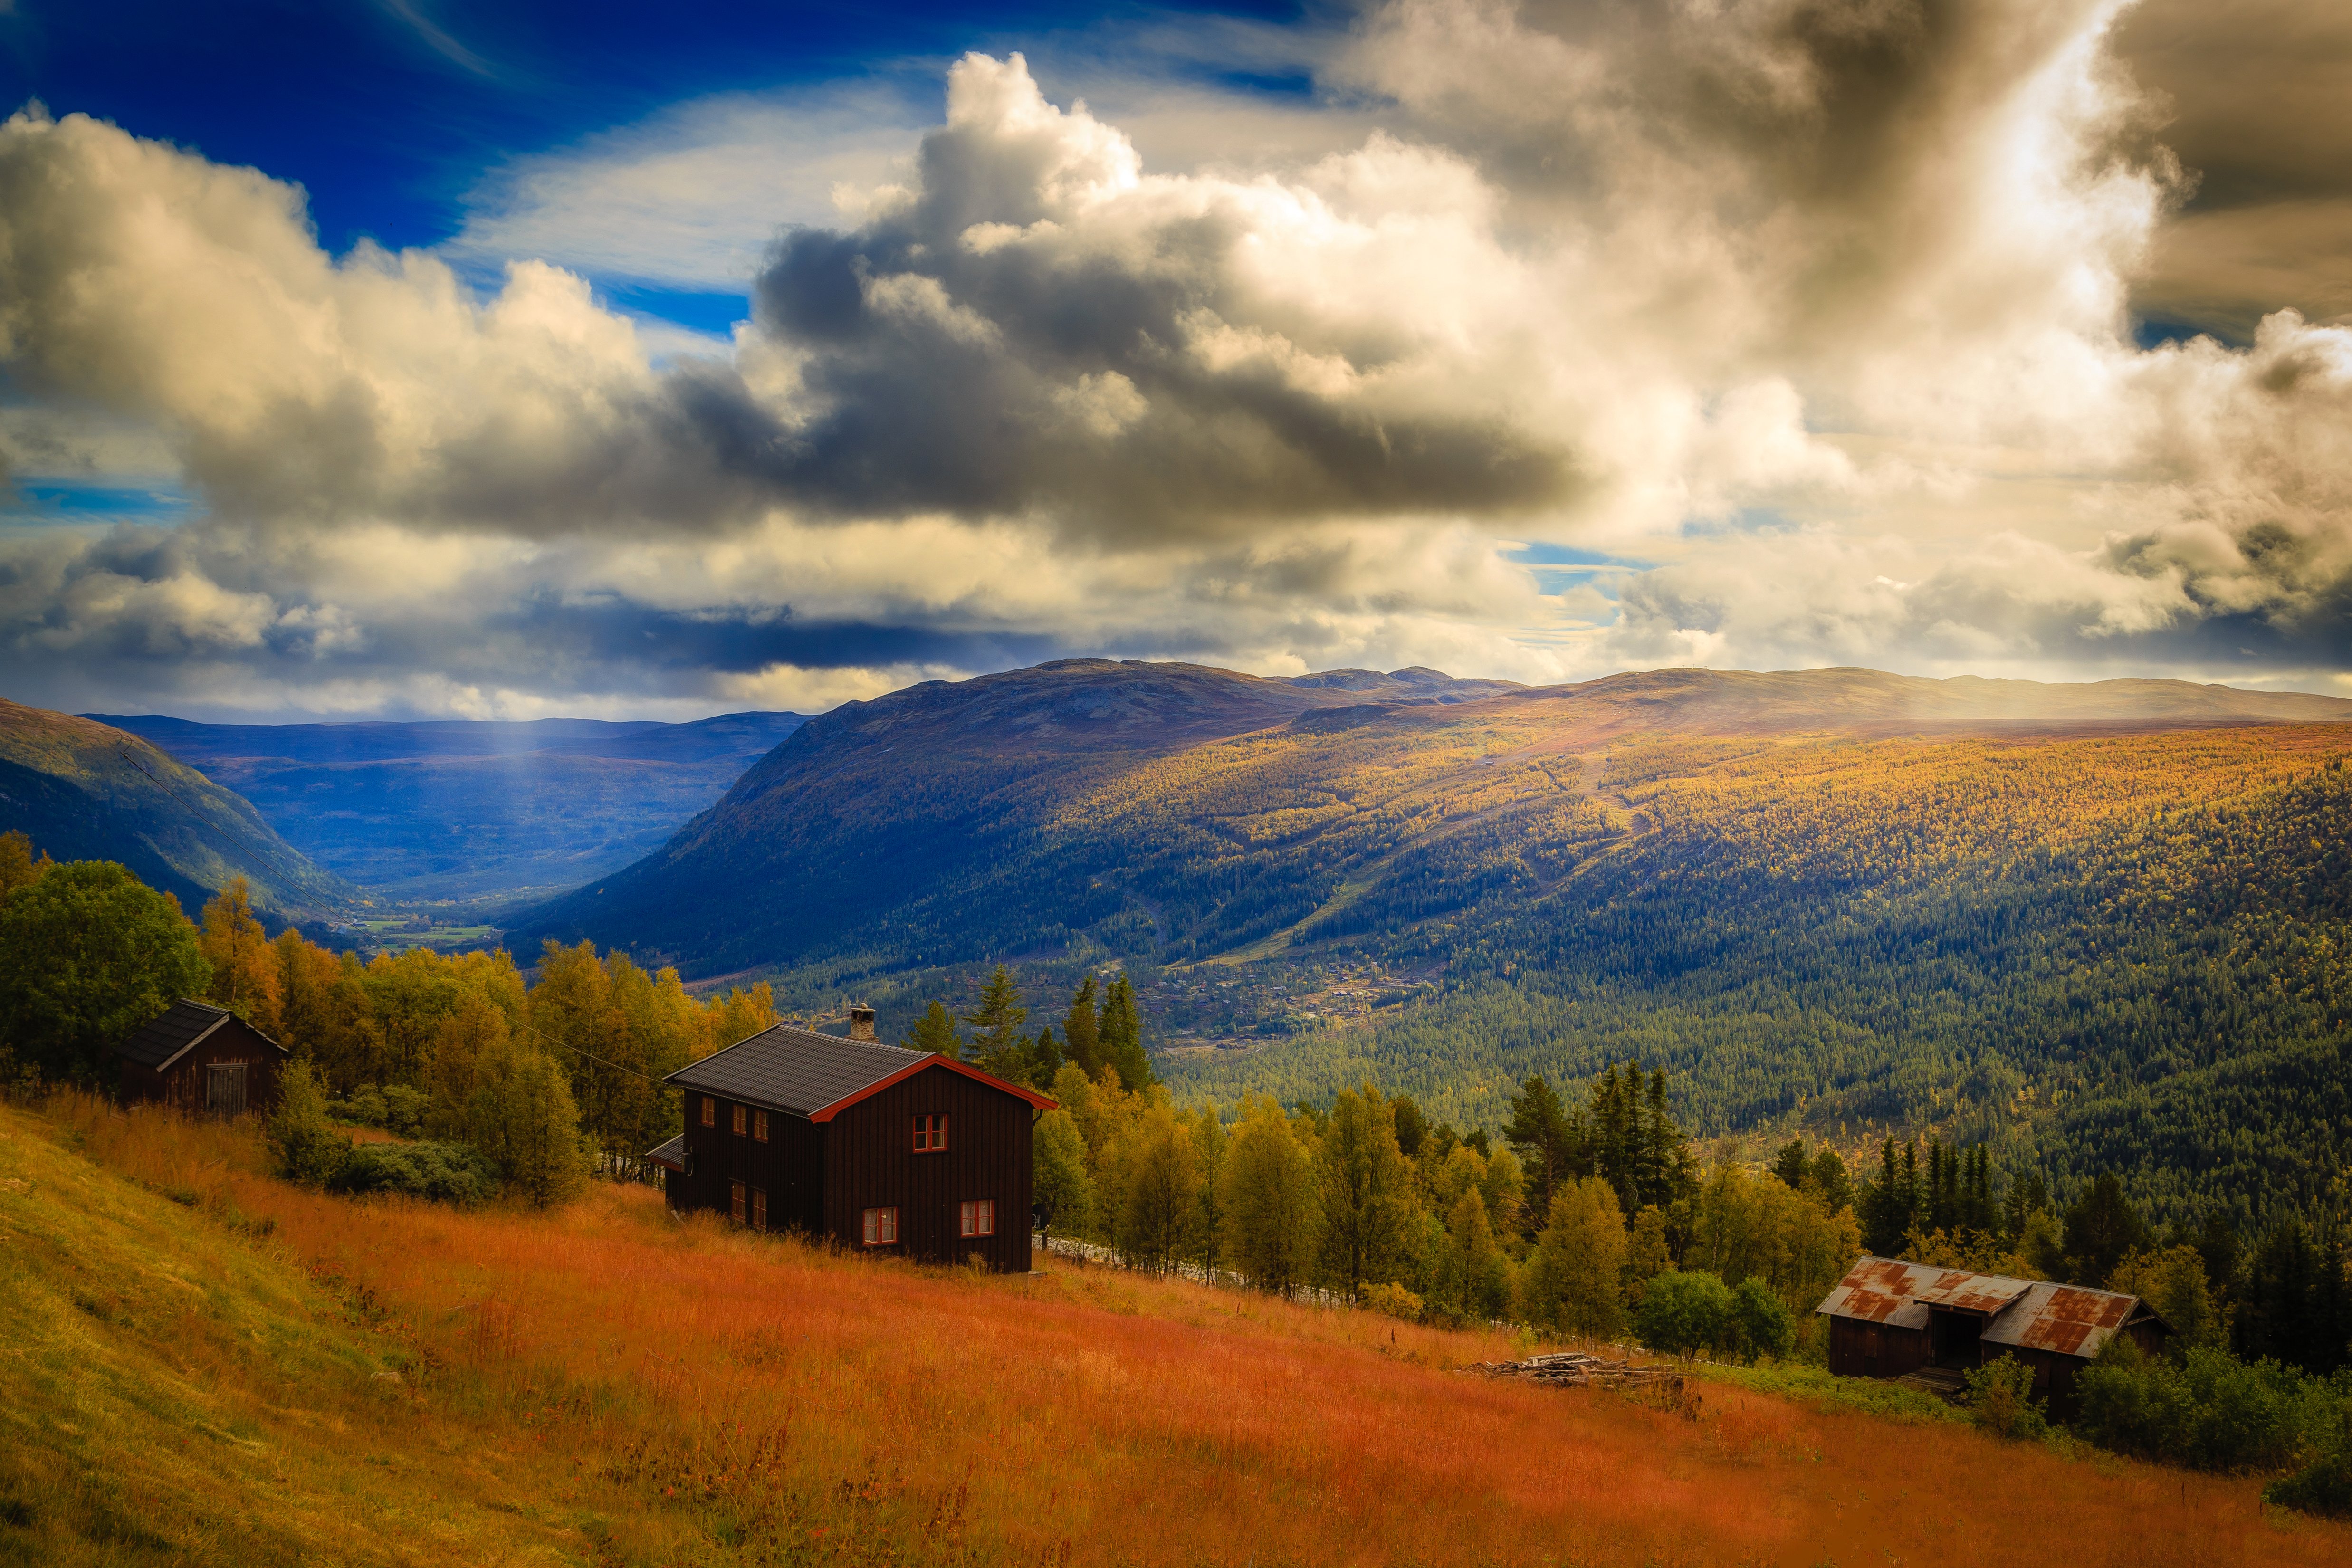 Norway Scenery Mountains Houses Forests Clouds Hardangervidda